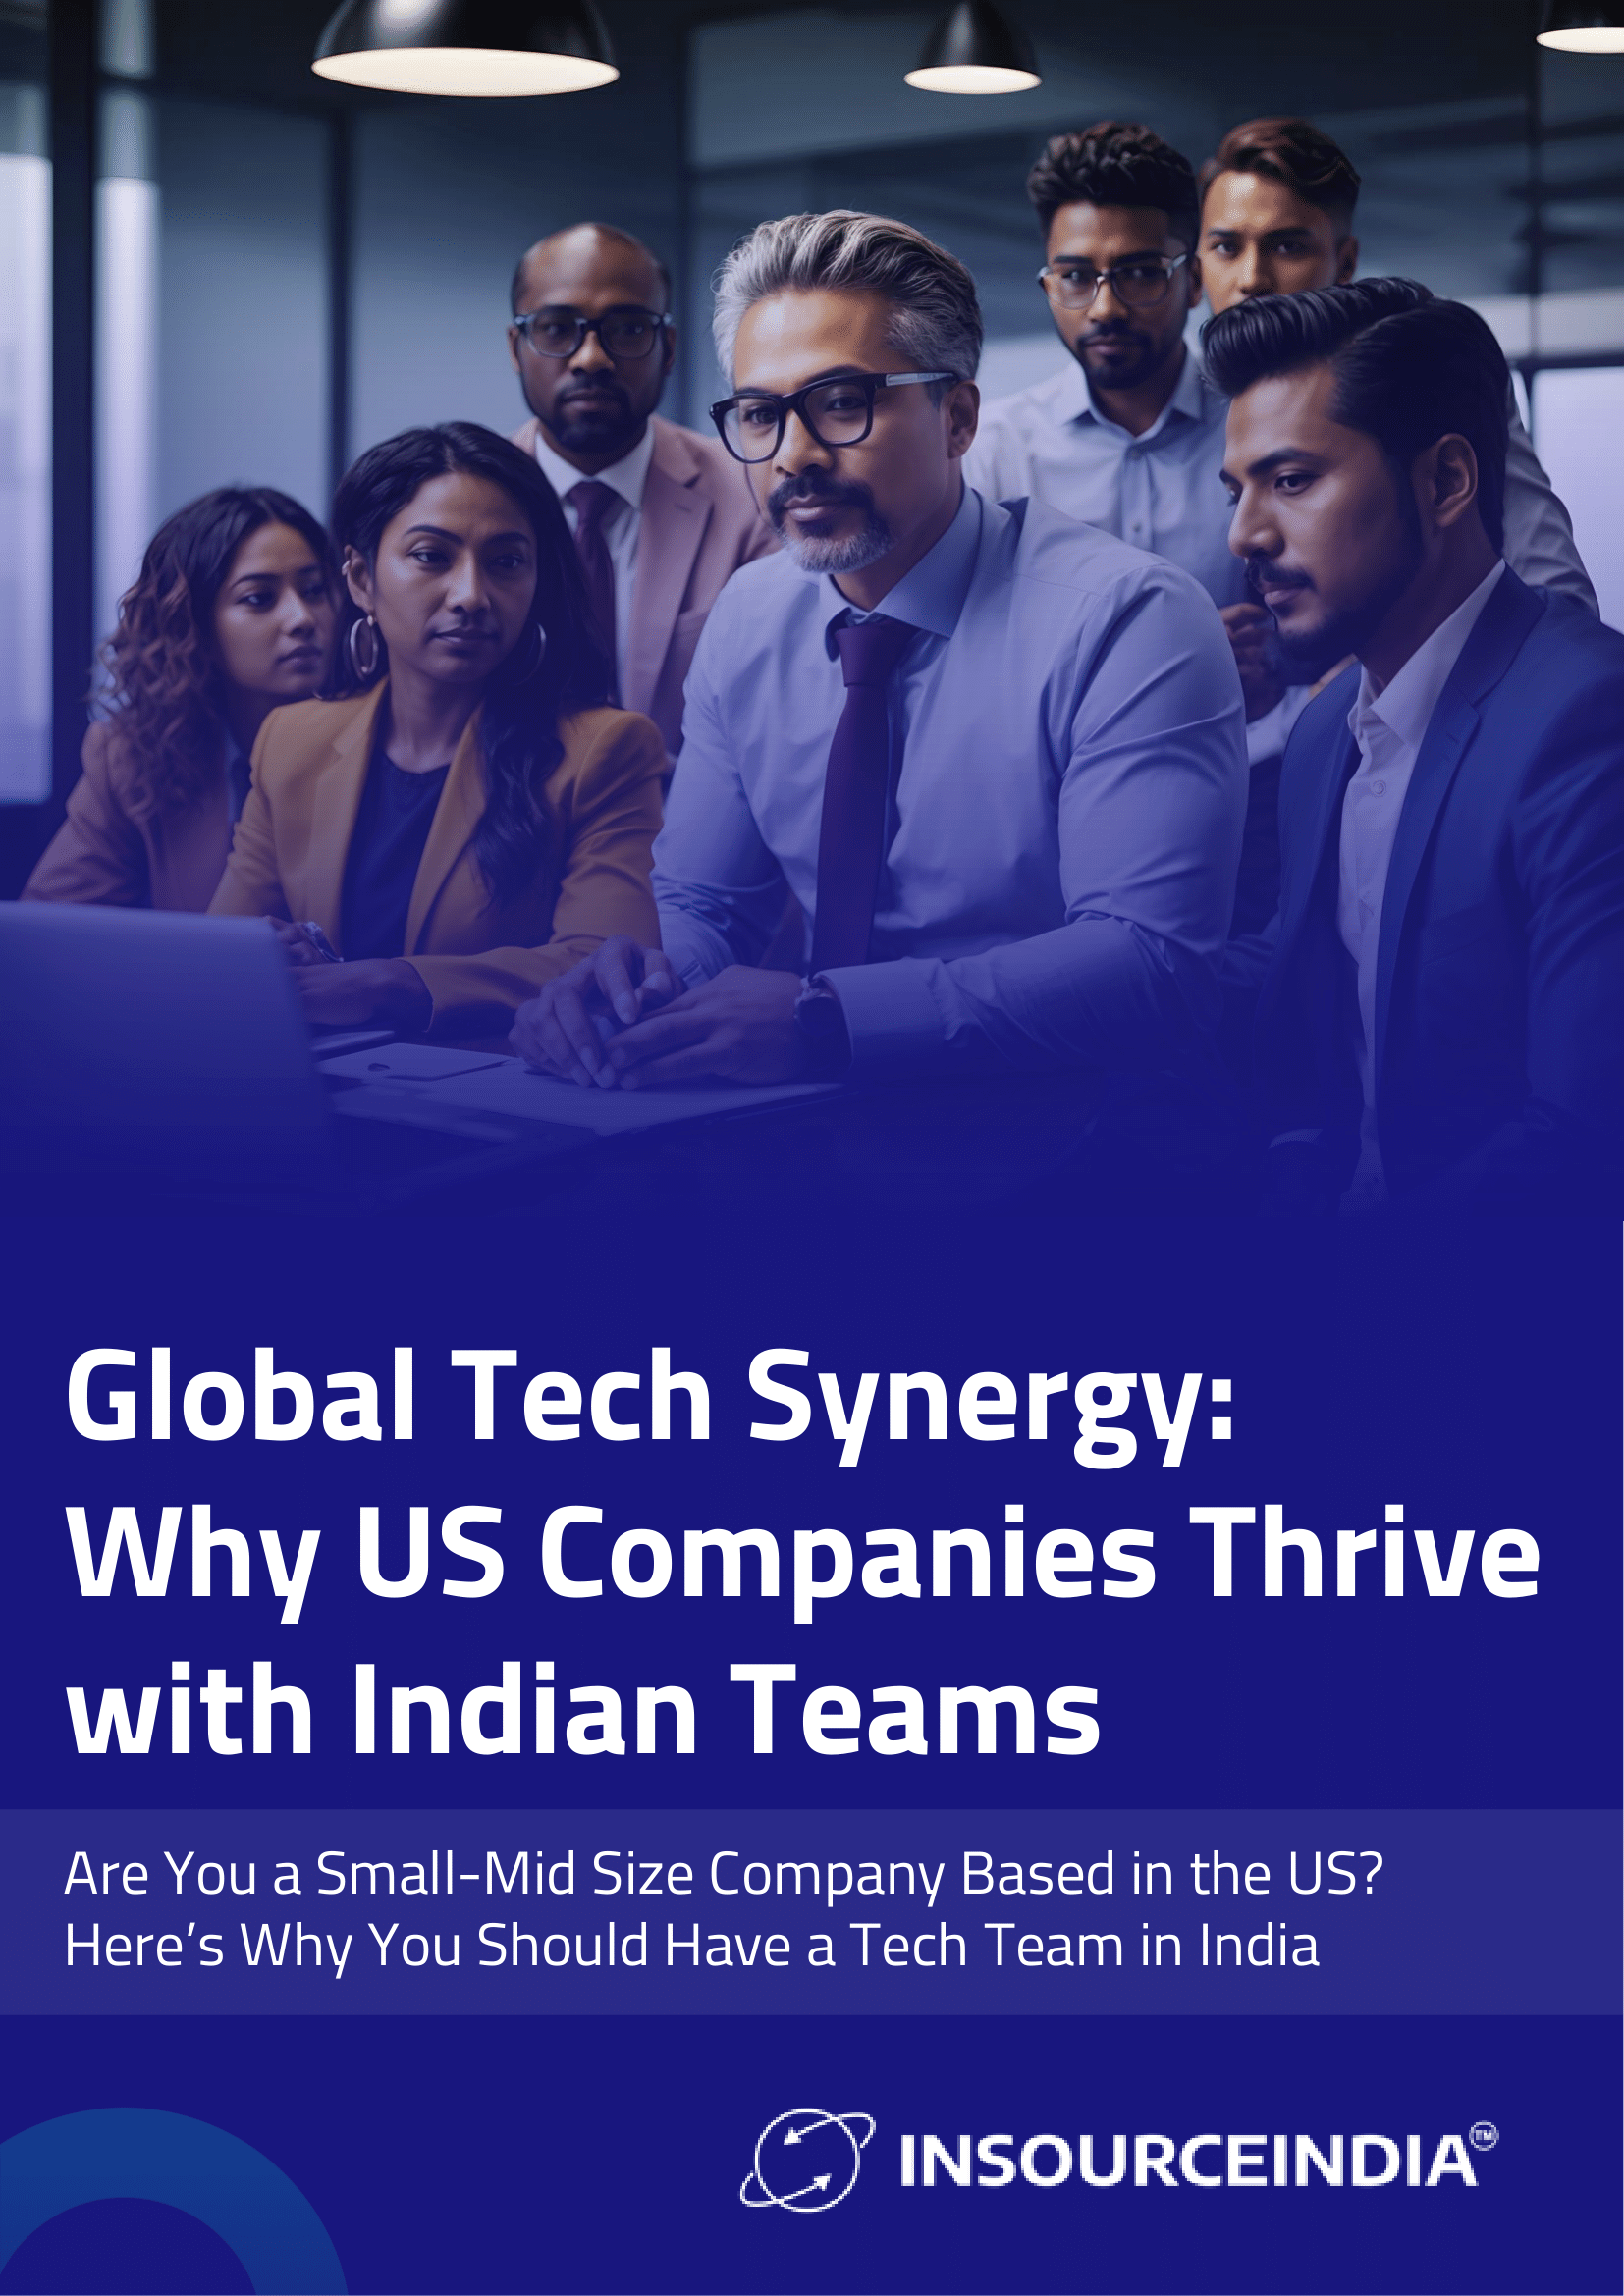 Global Tech Synergy Why US Companies Thrive with Indian Teams (1)